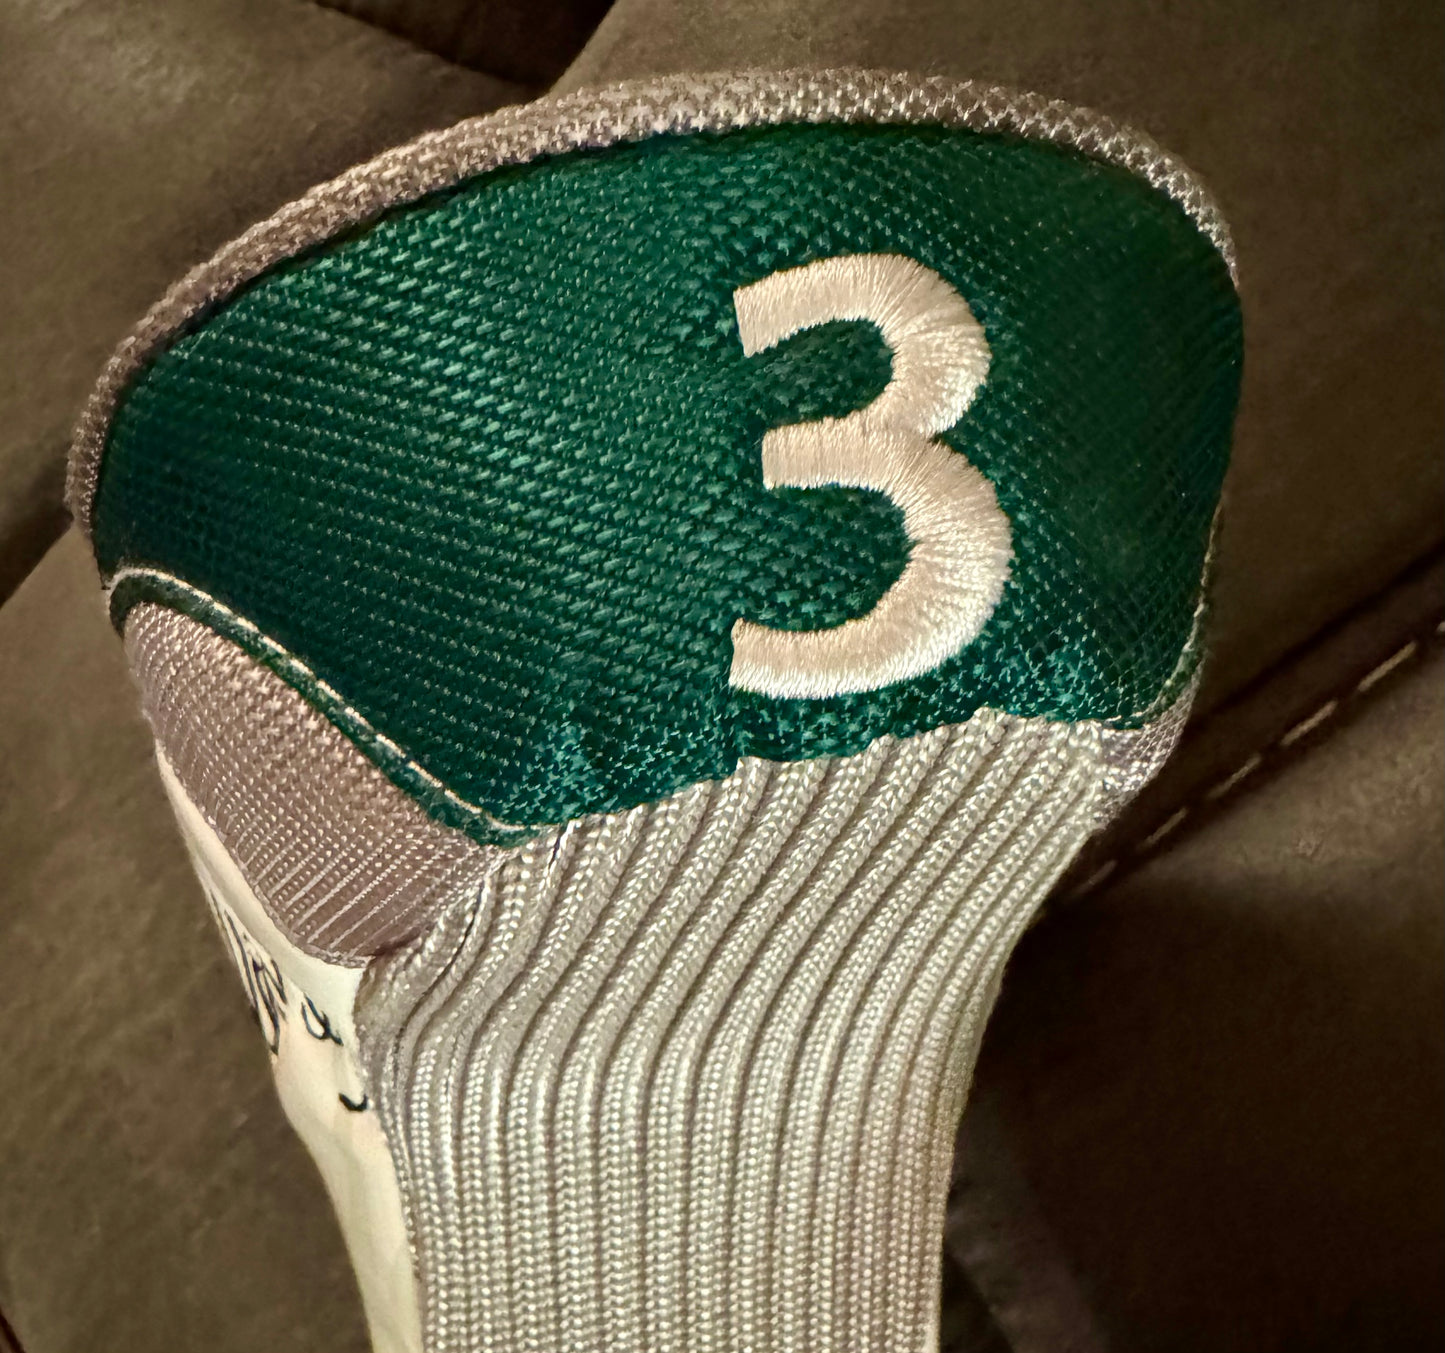 2 Vintage Callaway Headcovers - 3 & D included - Color: Green and Cream